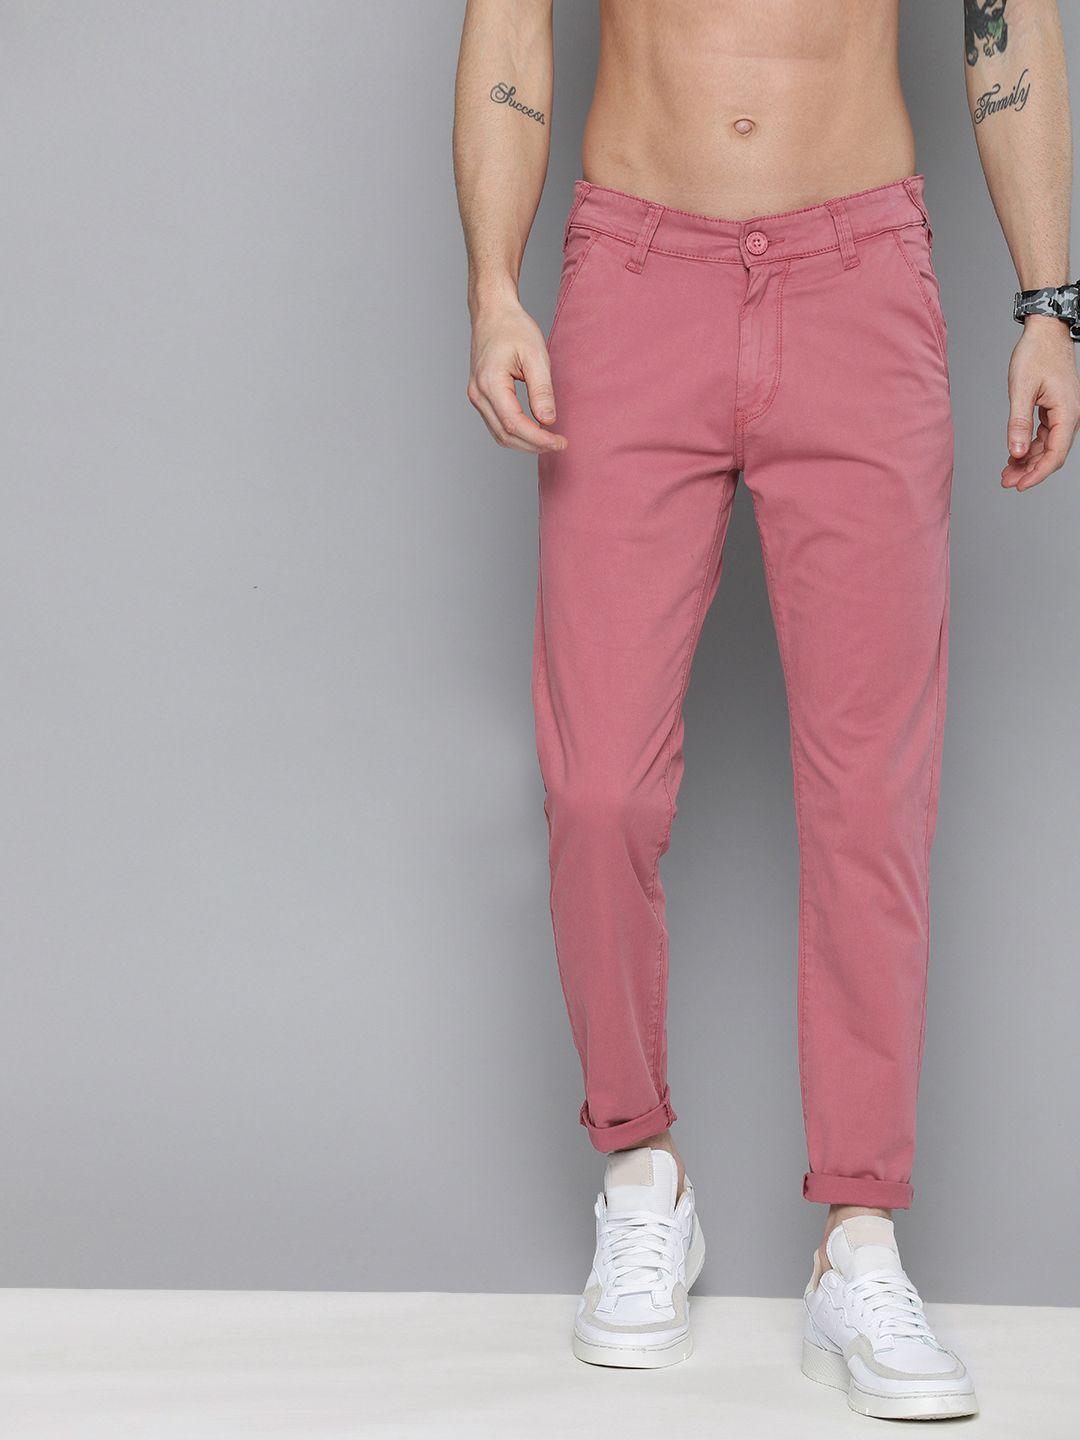 here&now men pink slim fit solid chinos